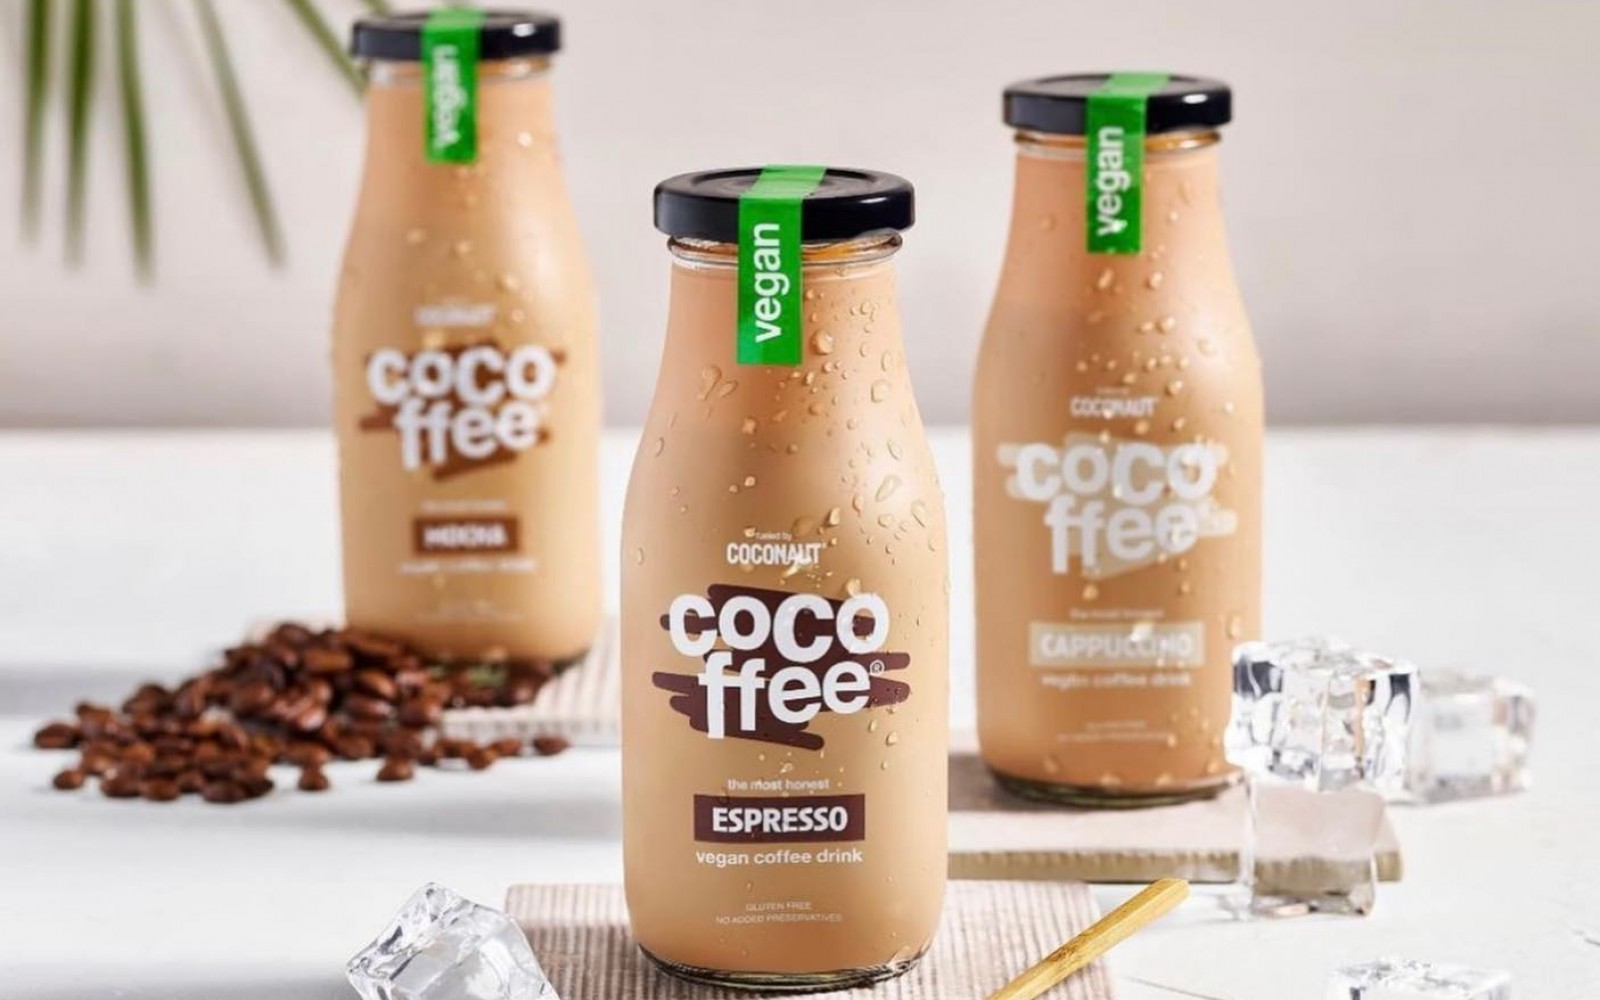   Appetizing drinks are available in three different flavors: espresso, mocha and cappuccino